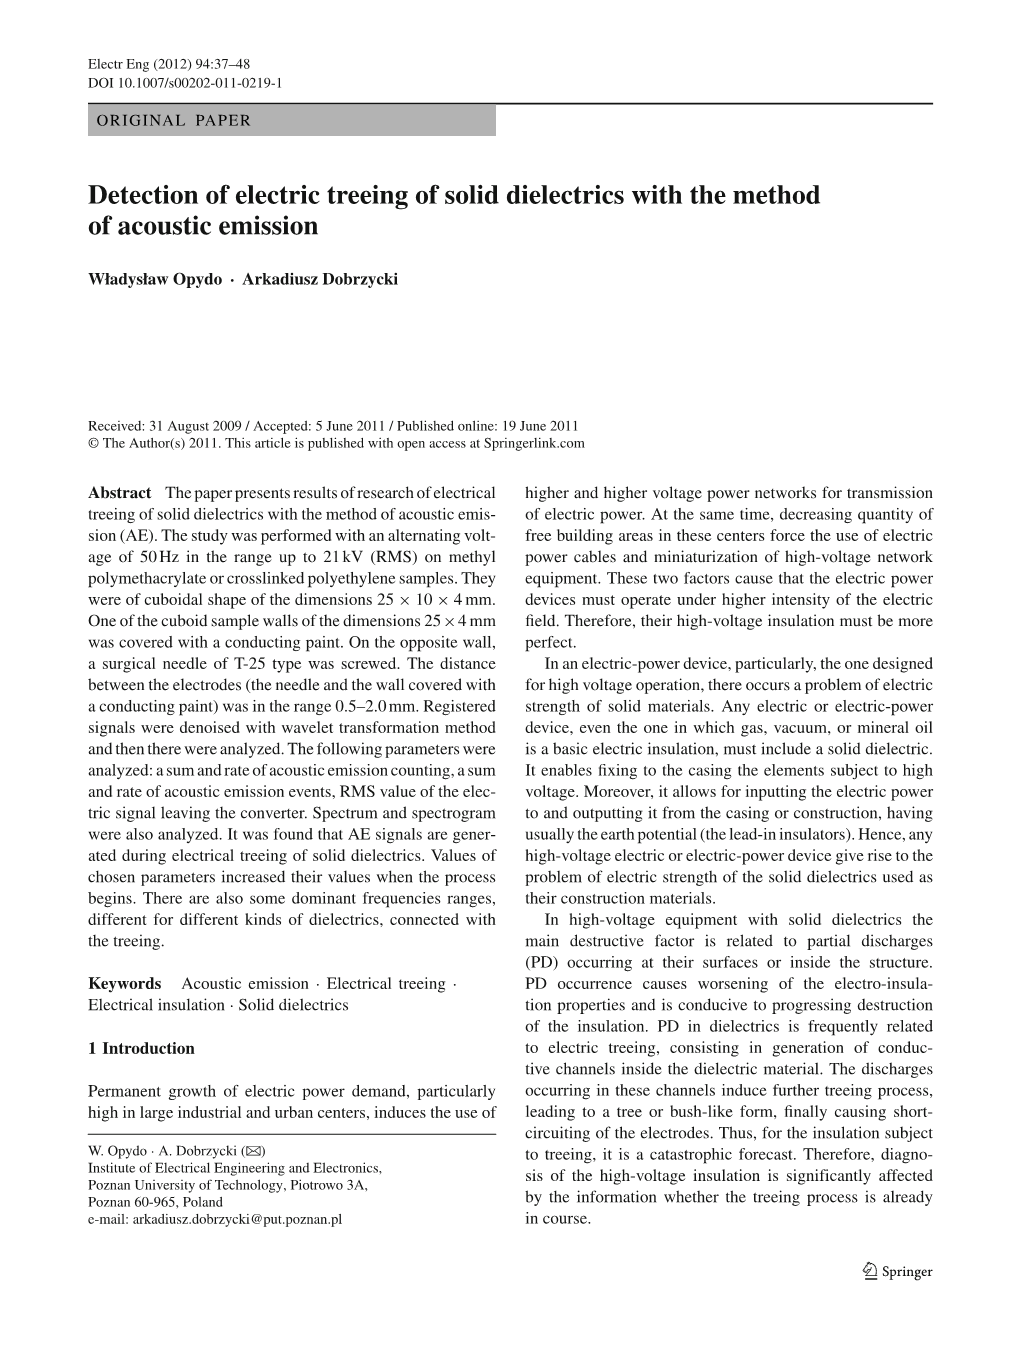 Detection of Electric Treeing of Solid Dielectrics with the Method of Acoustic Emission